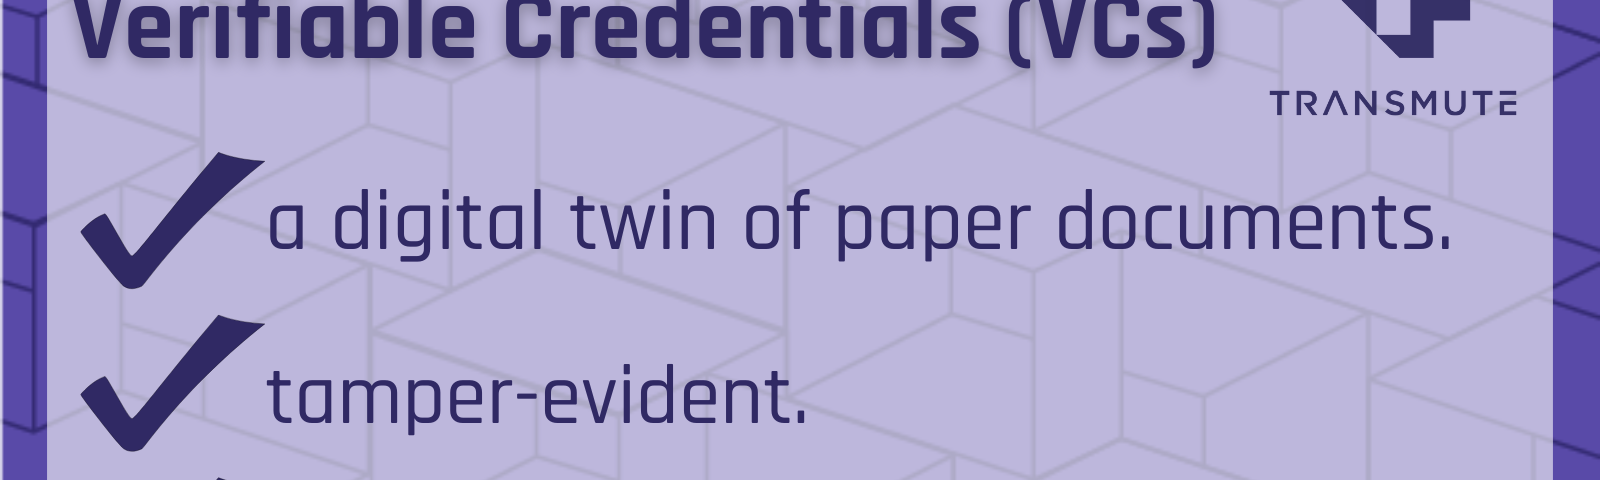 Flashcard for the definition of Verifiable Credentials (VCs): a digital twin of paper documents; tamper evident; cryptographically verifiable.